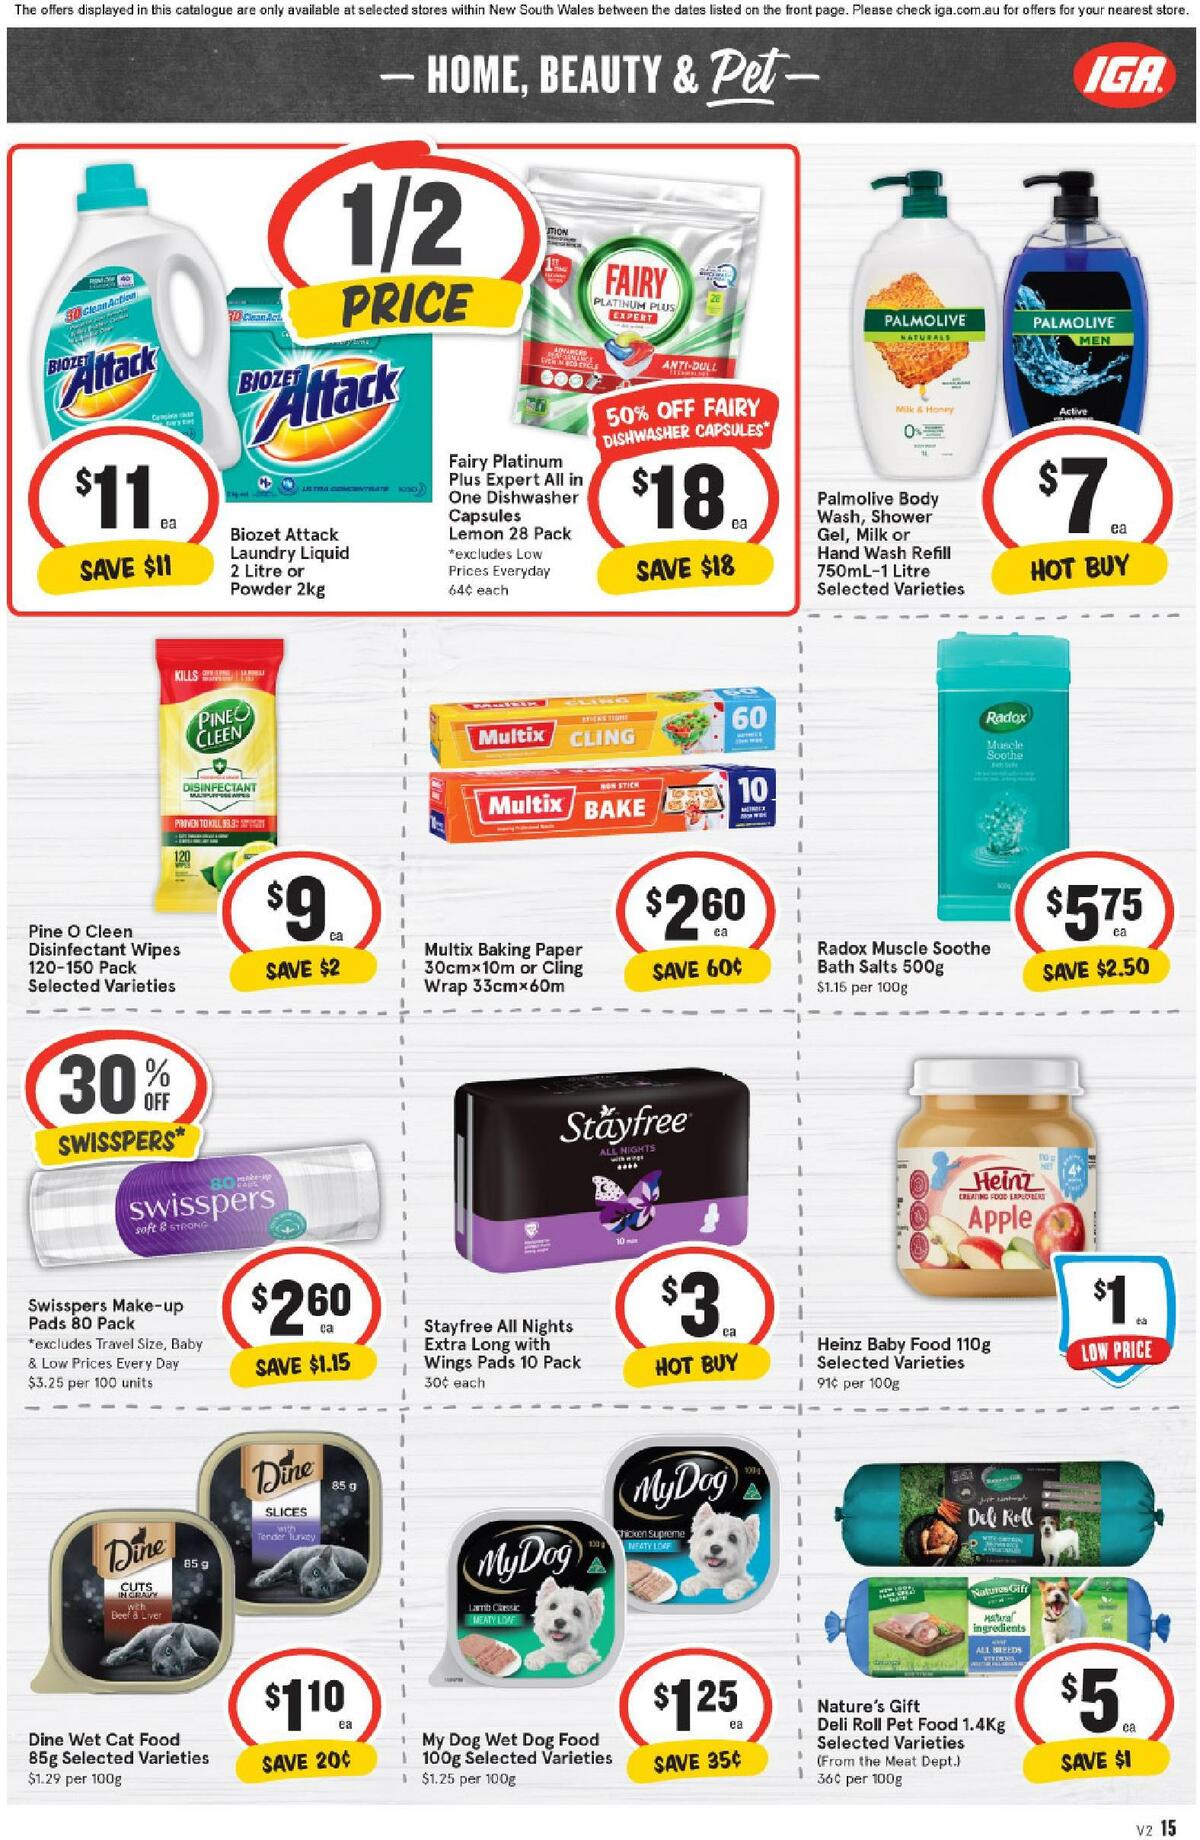 IGA Catalogues from 20 July